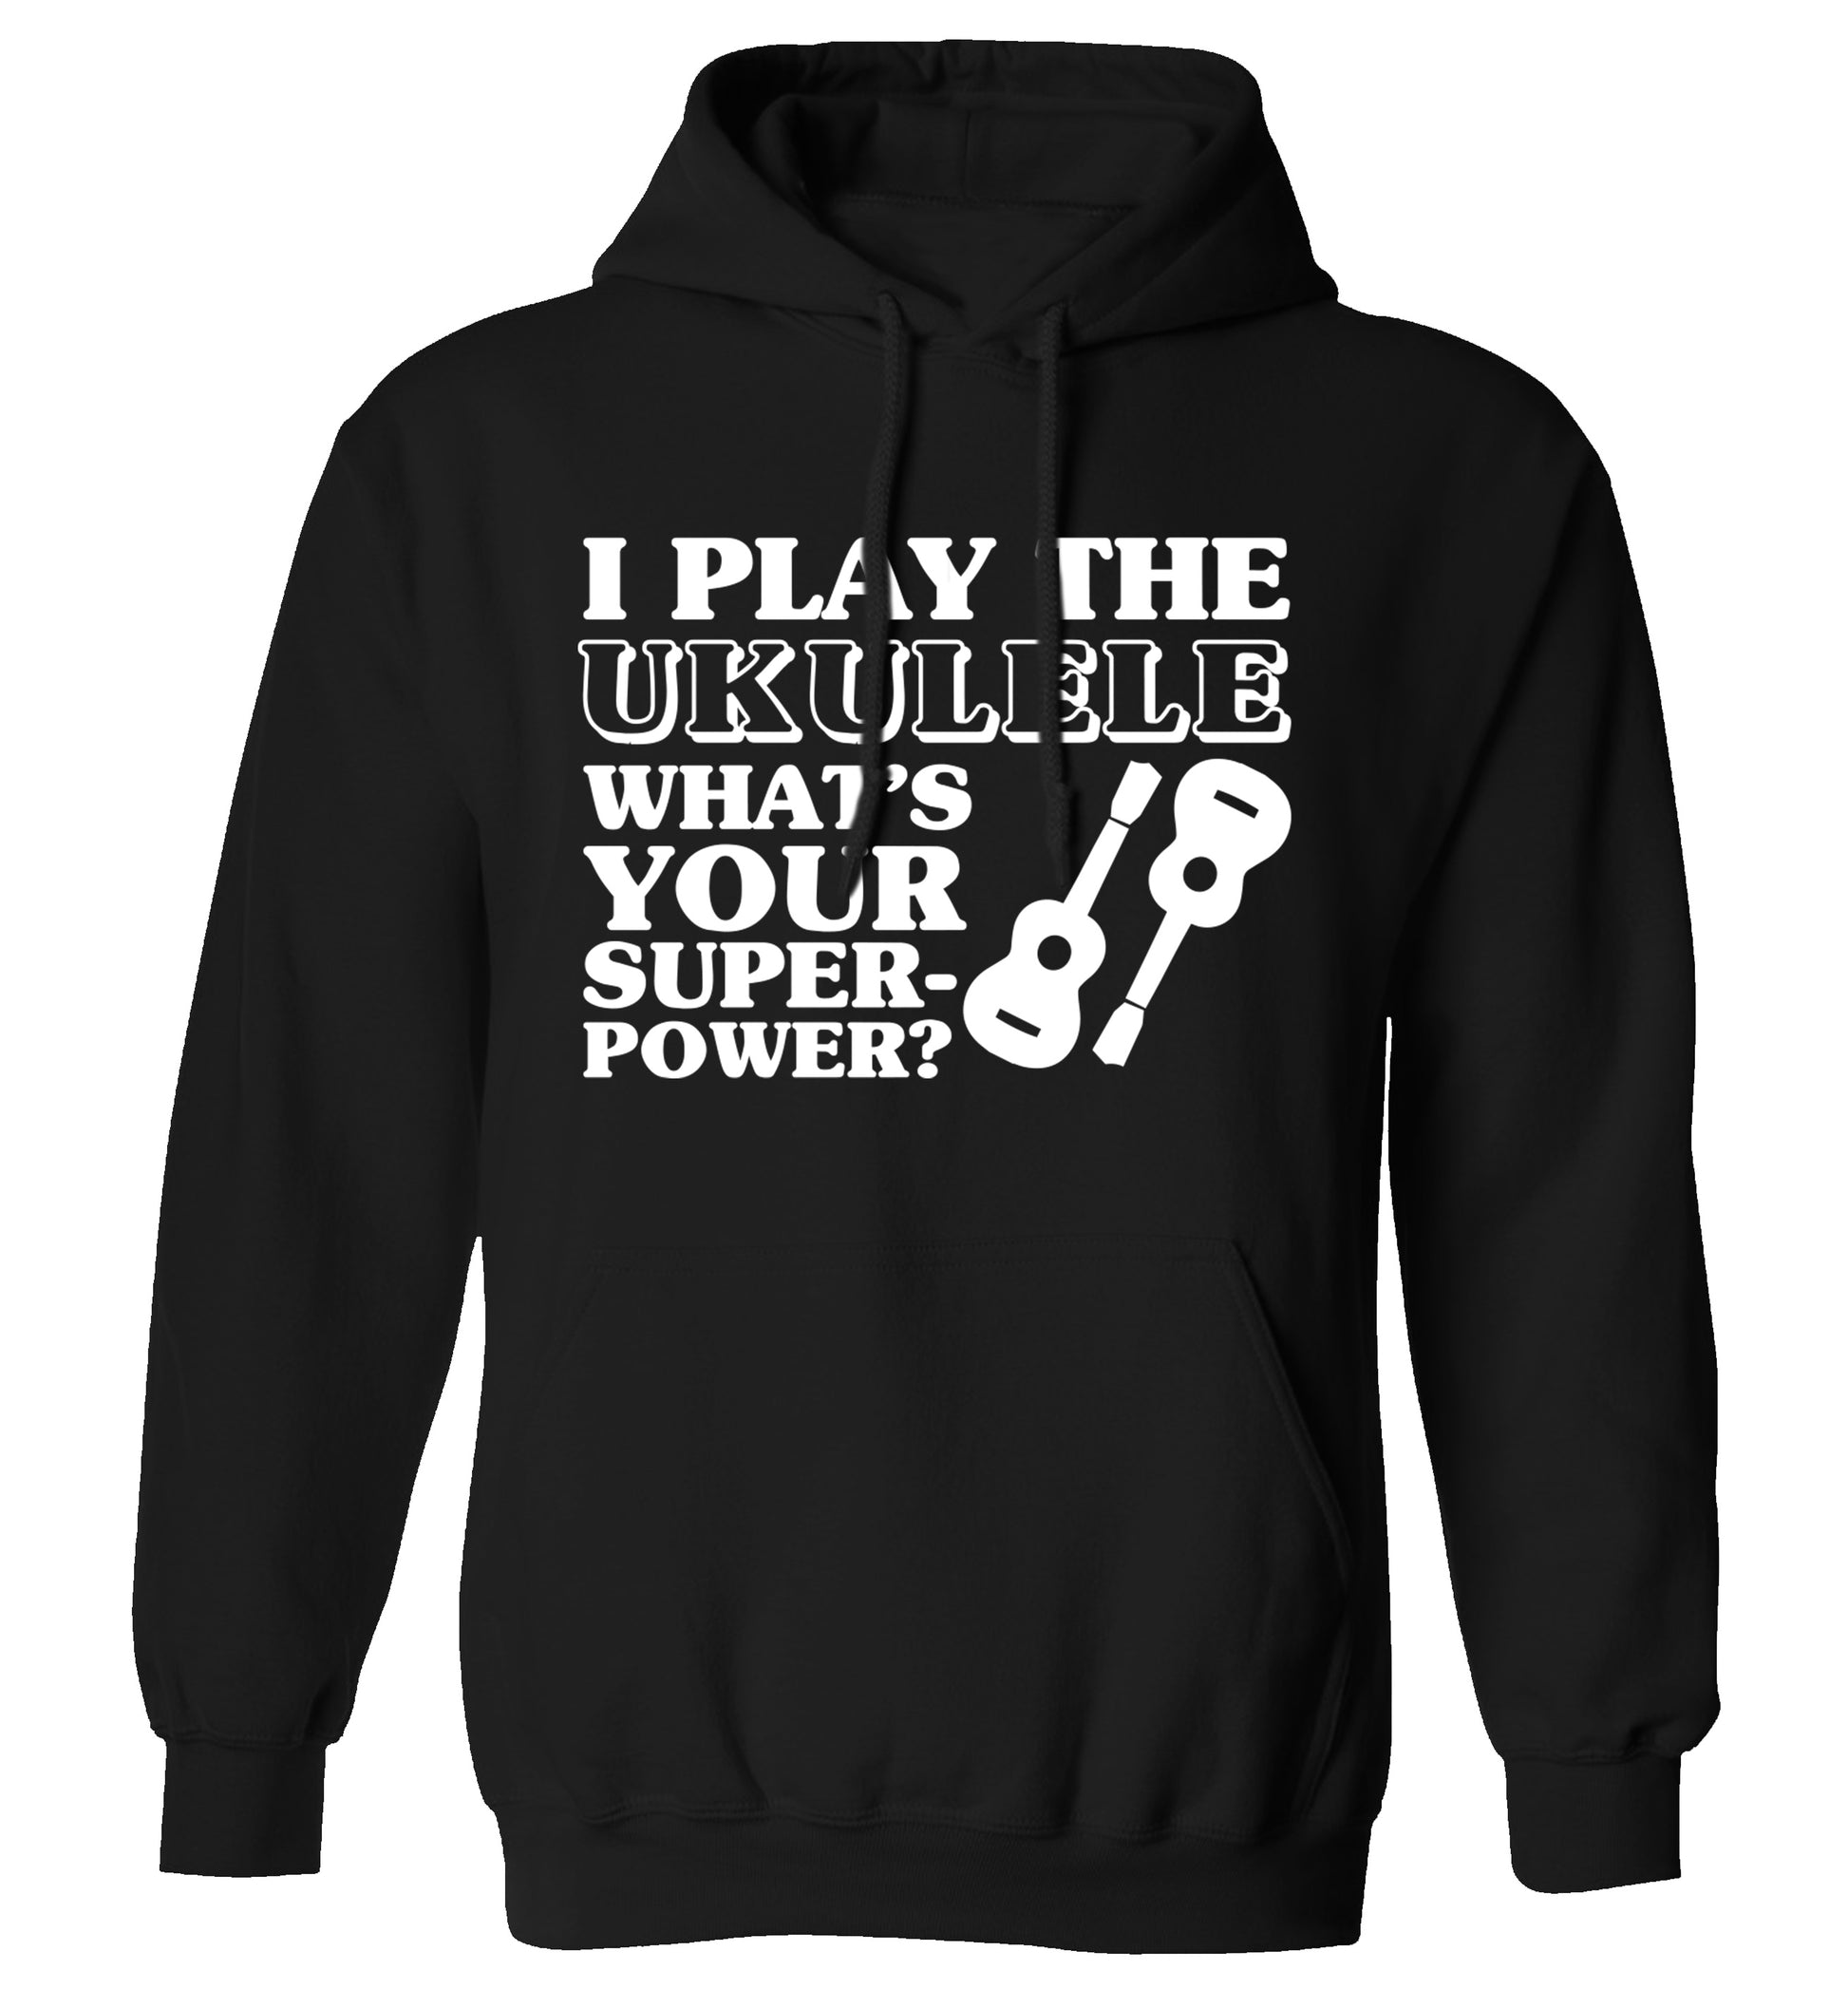 I play the ukulele what's your superpower? adults unisex black hoodie 2XL